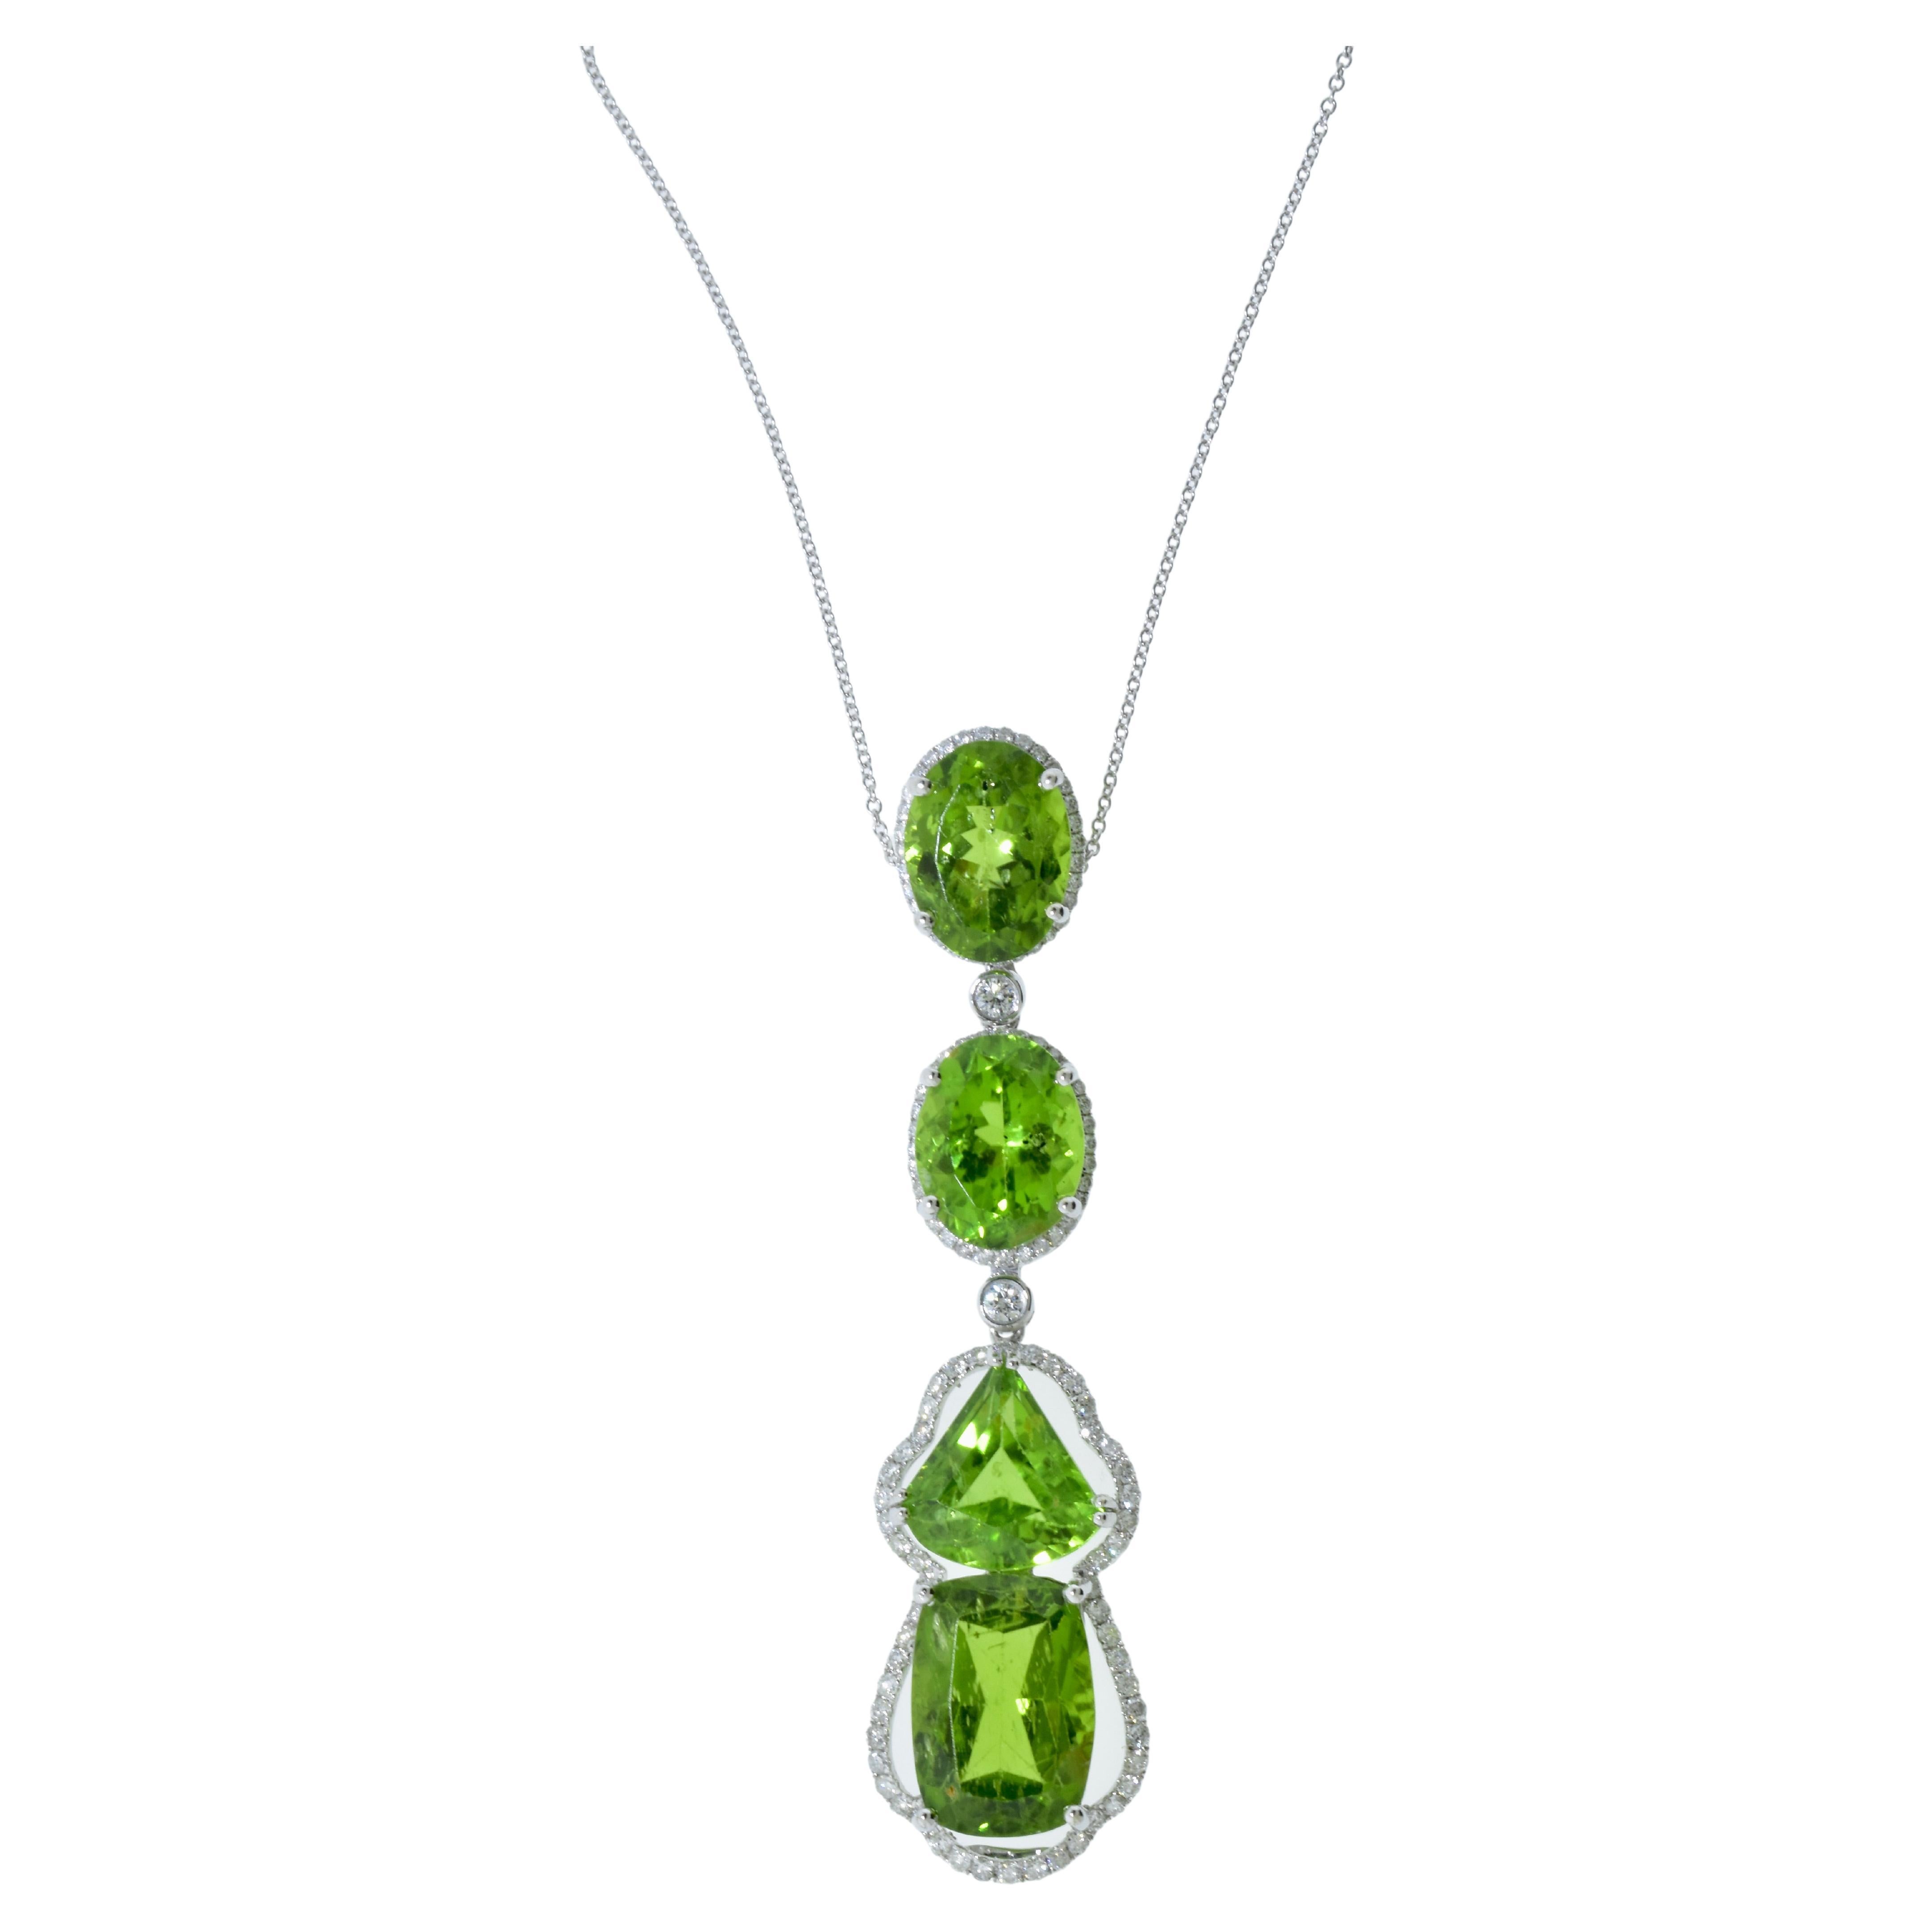 Diamond and peridot pendant necklace.  27 is the magic number of carats of lime green fancy natural peridot shapes that spell out - at least symbolically - the word 